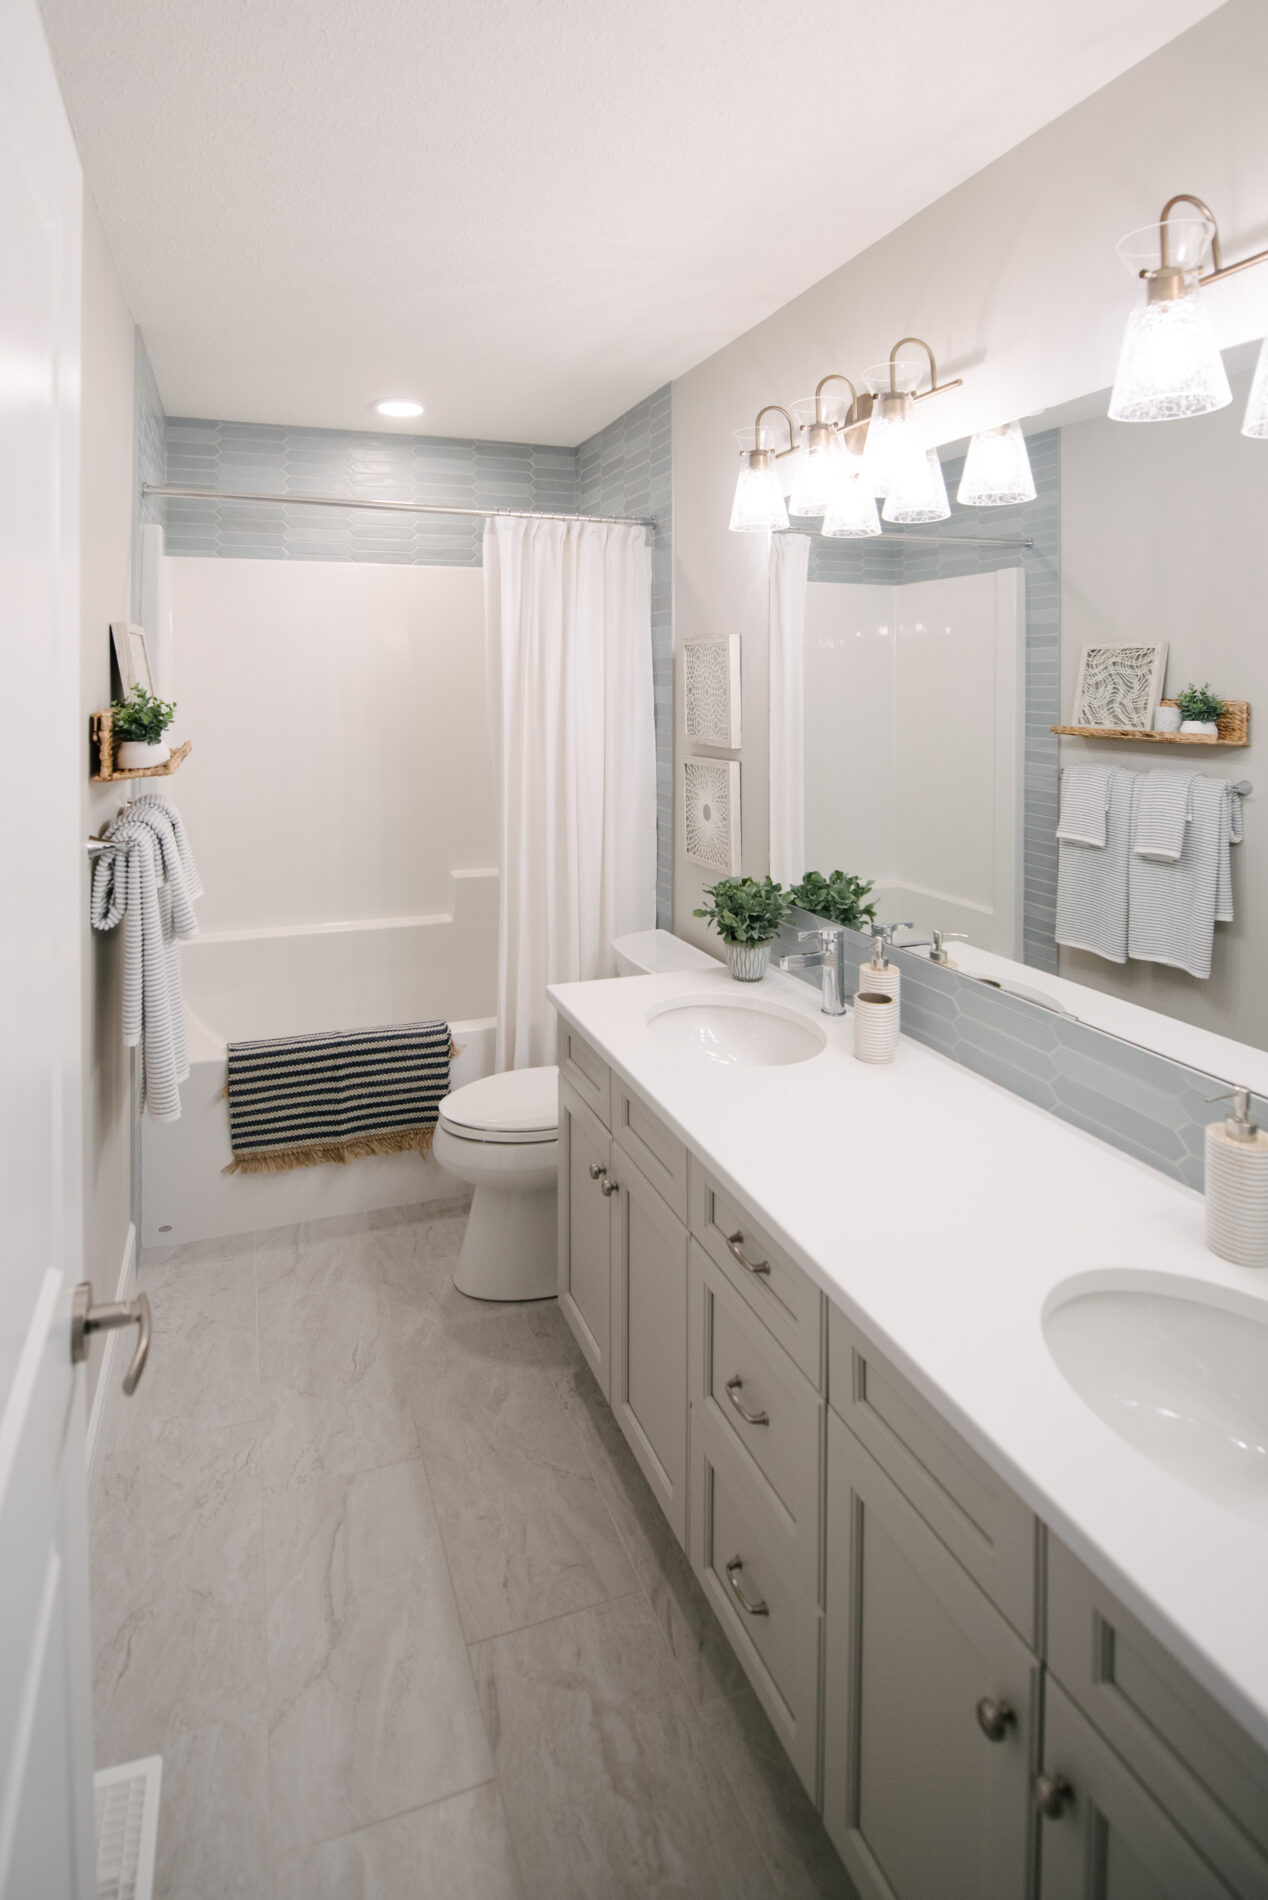 A large main bathroom with dual sinks, white countertops, warm grey/beige cabinets, and light blue backsplash tile. The light blue tile is carried around the tub/shower at the back of the room